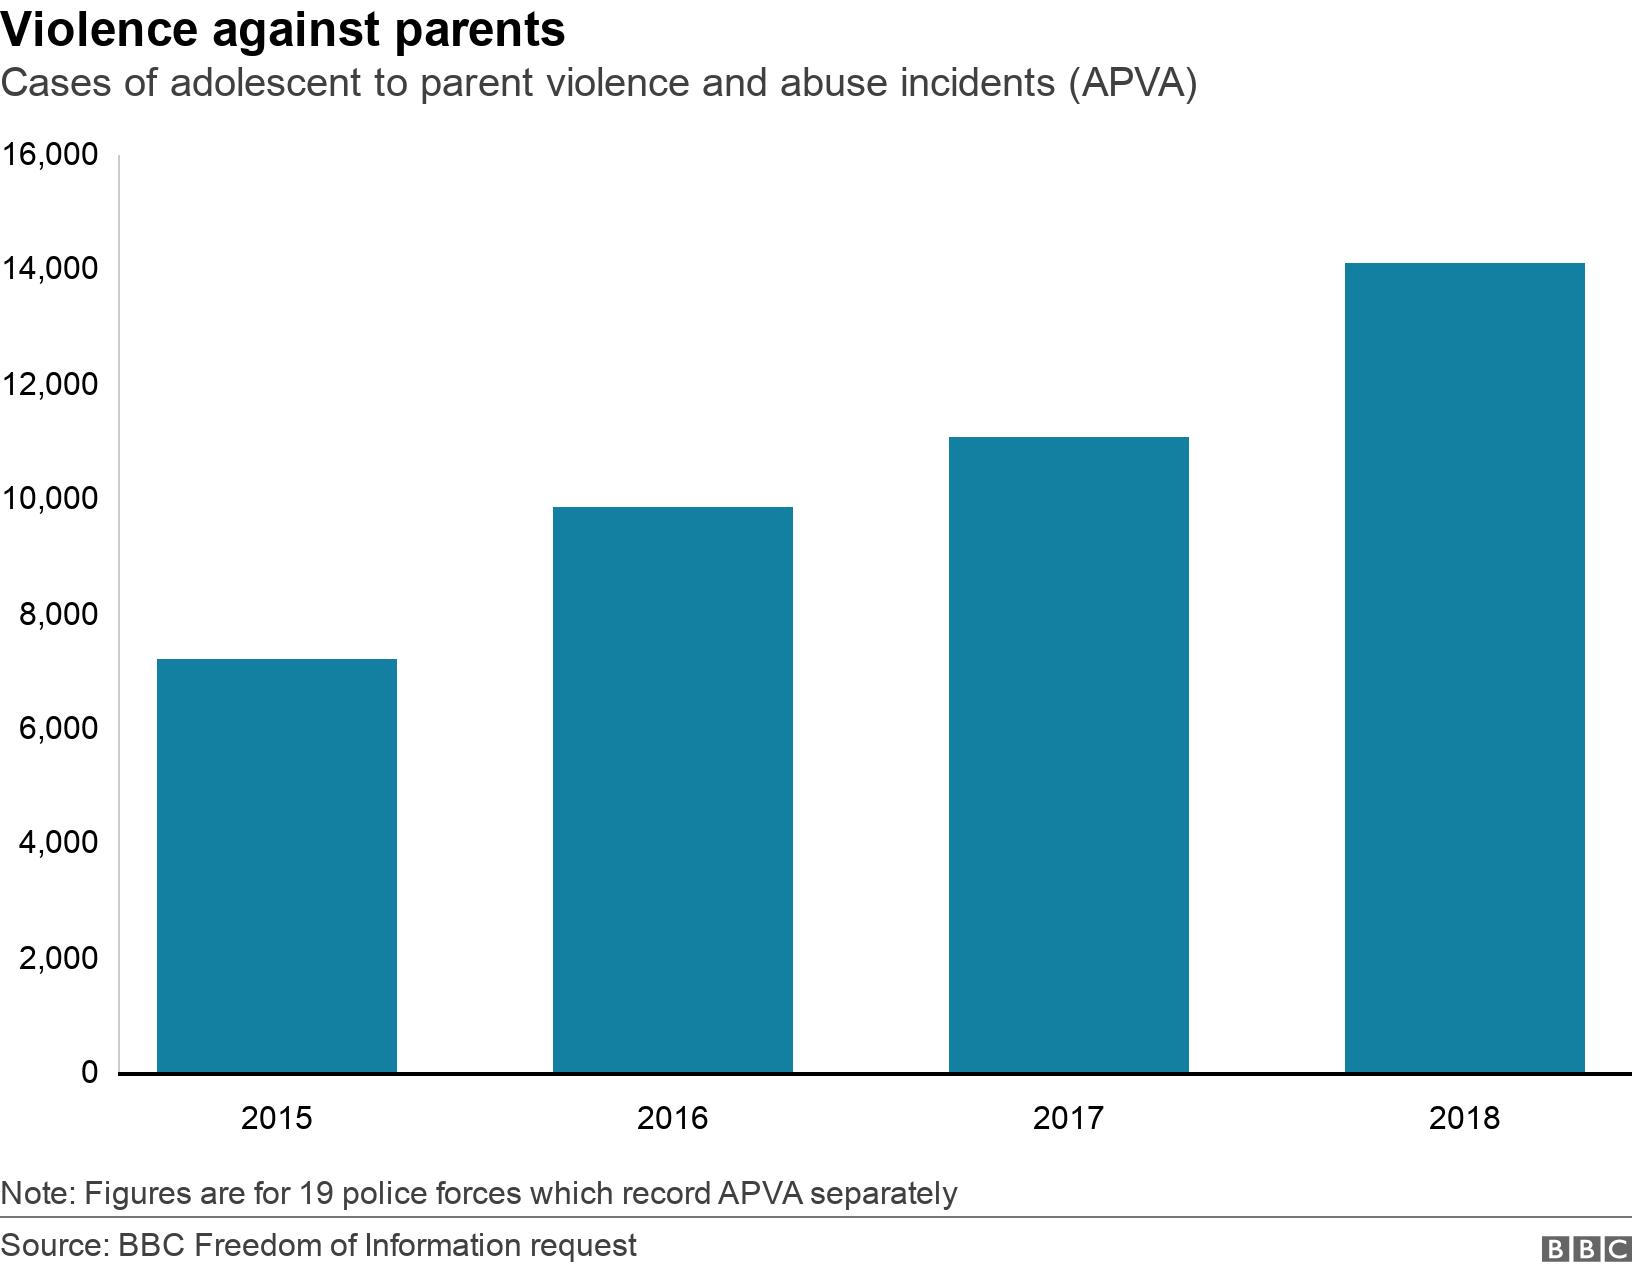 Violence against parents. Cases of adolescent to parent violence and abuse incidents (APVA). Recorded cases of adolescent to parent violence or abuse incidents Note: Figures are for 19 police forces which record APVA separately.